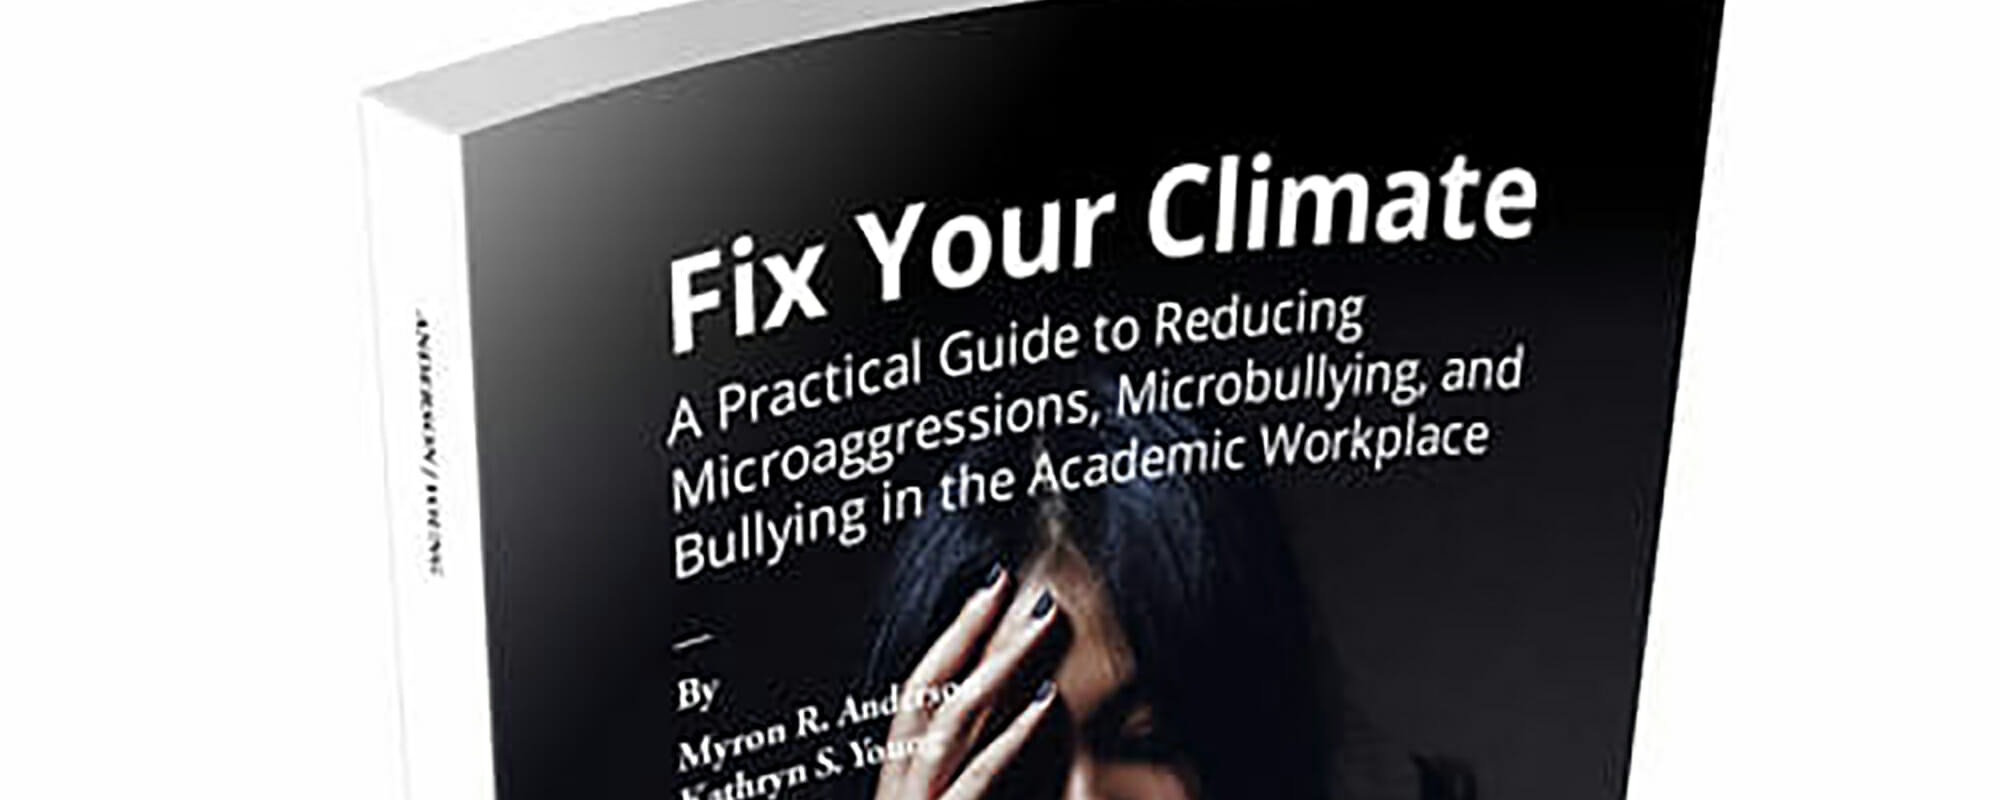 Fix Your Climate book cover